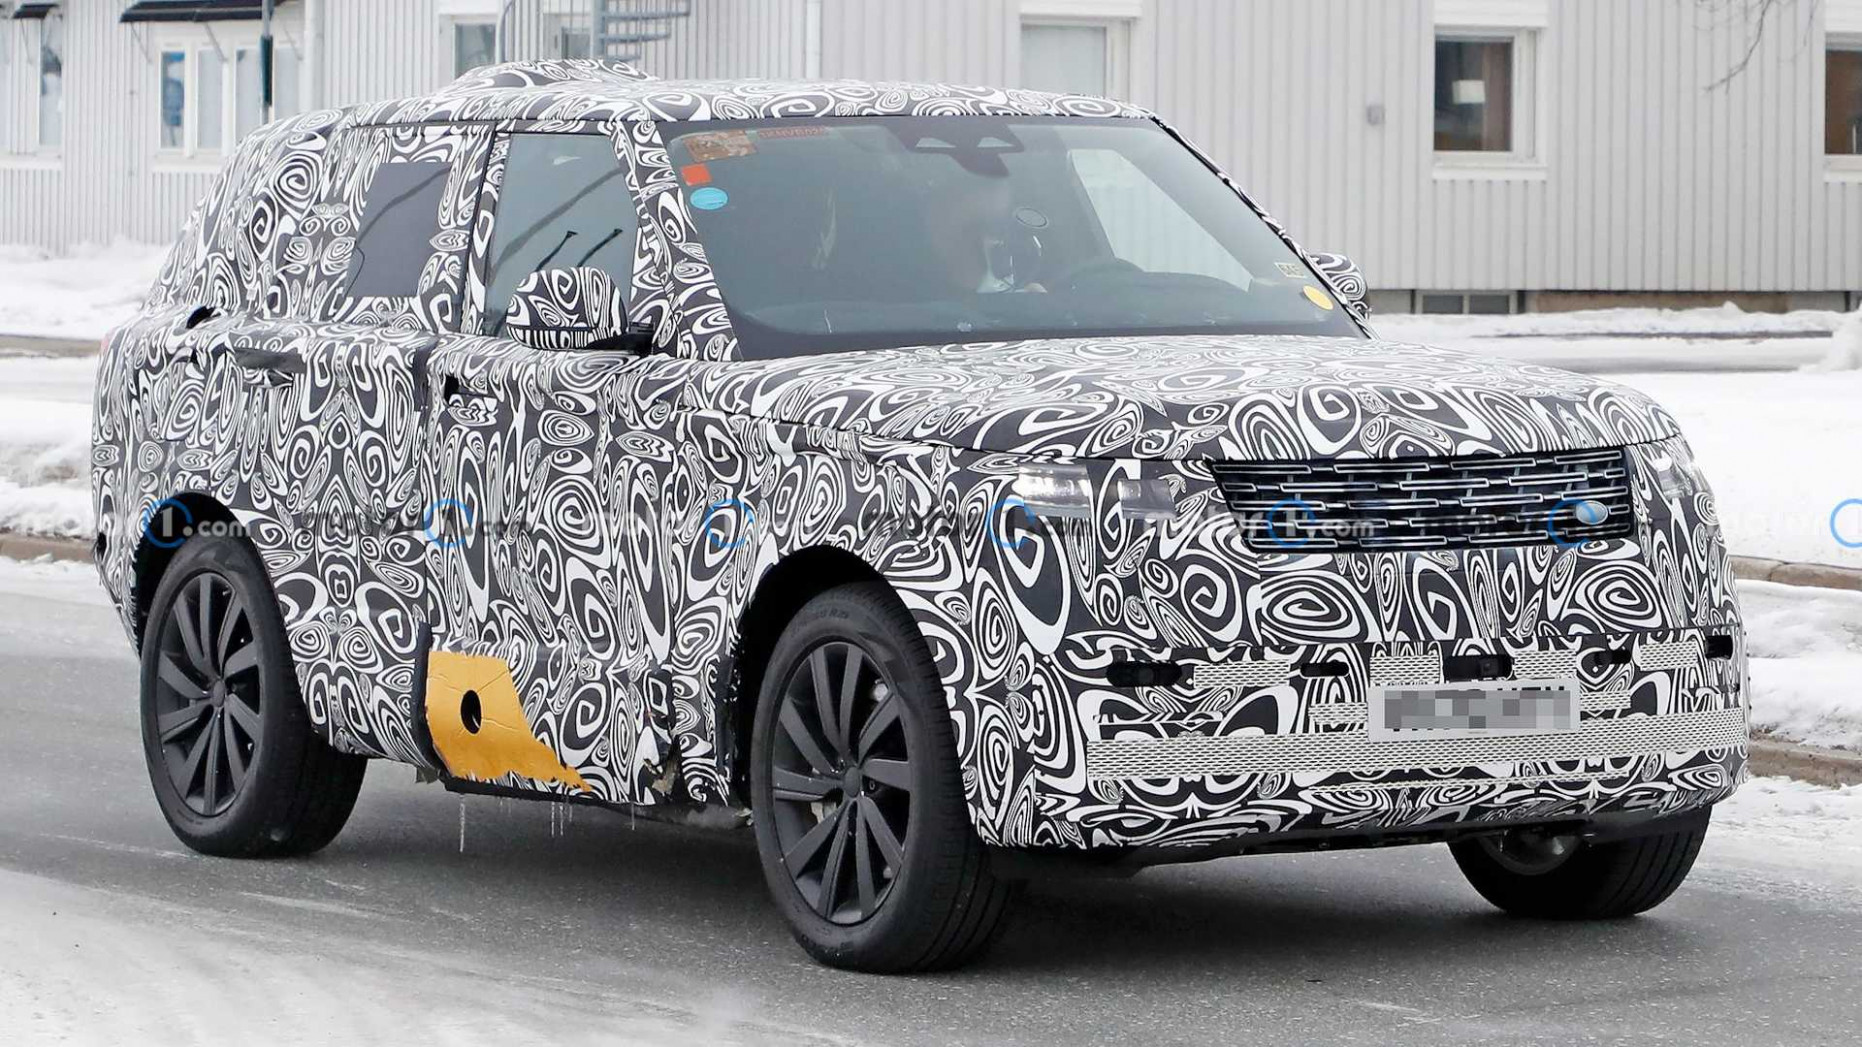 Performance and New Engine 2022 range rover release date